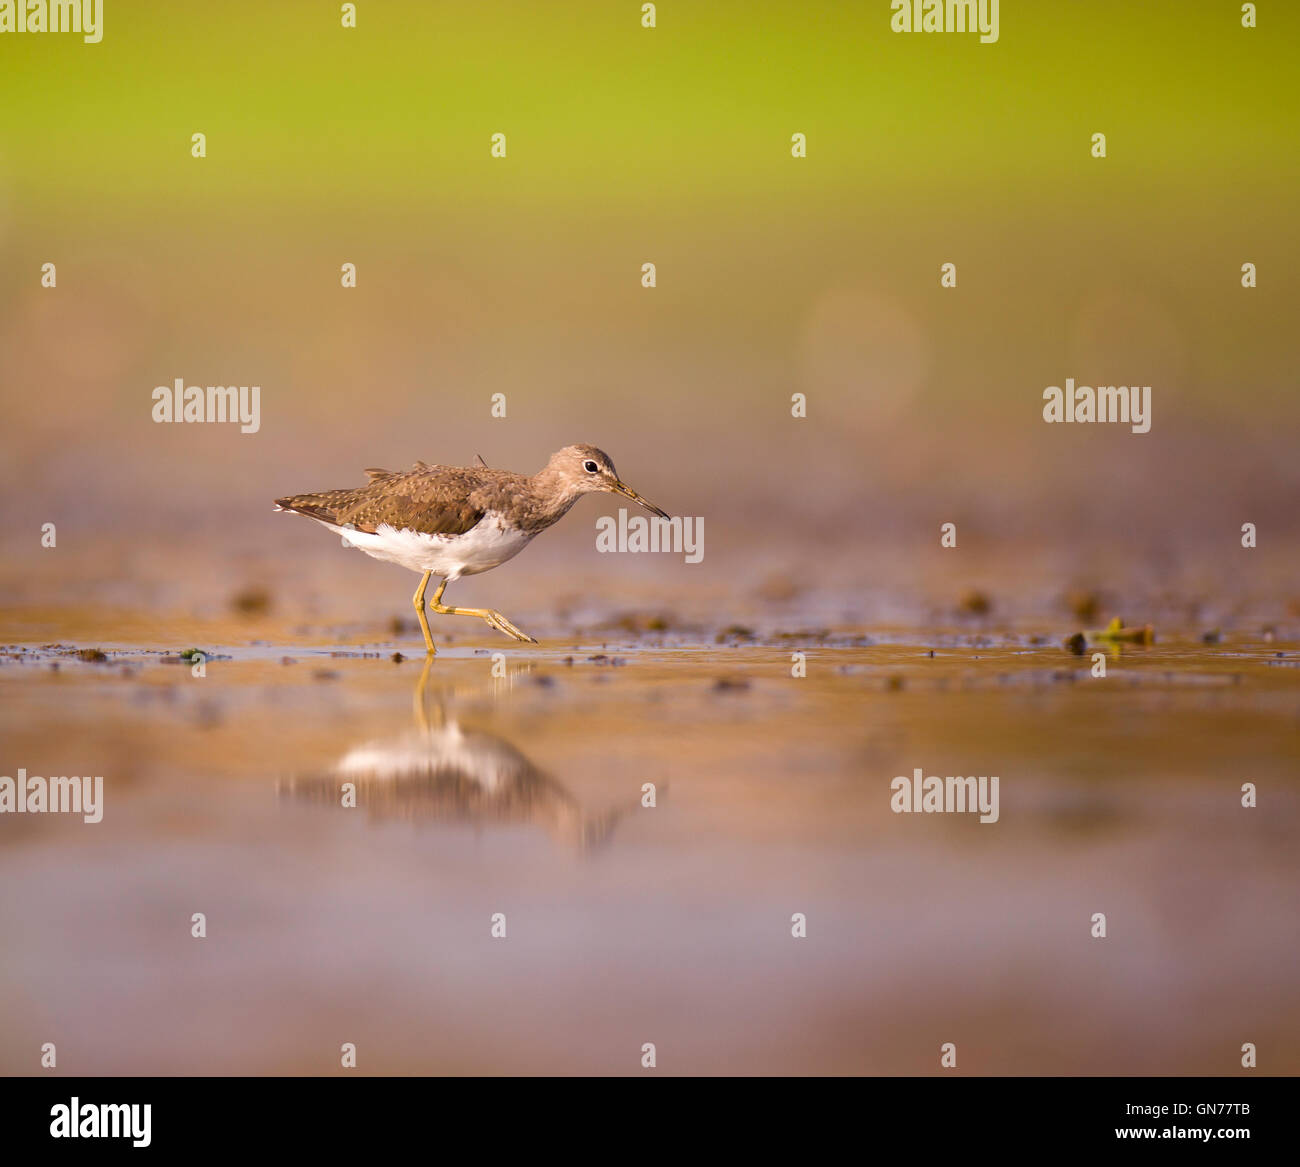 Wood sandpiper (Tringa glareola). This bird is a wader that forages in shallow water or mudflats in or around freshwater lakes a Stock Photo